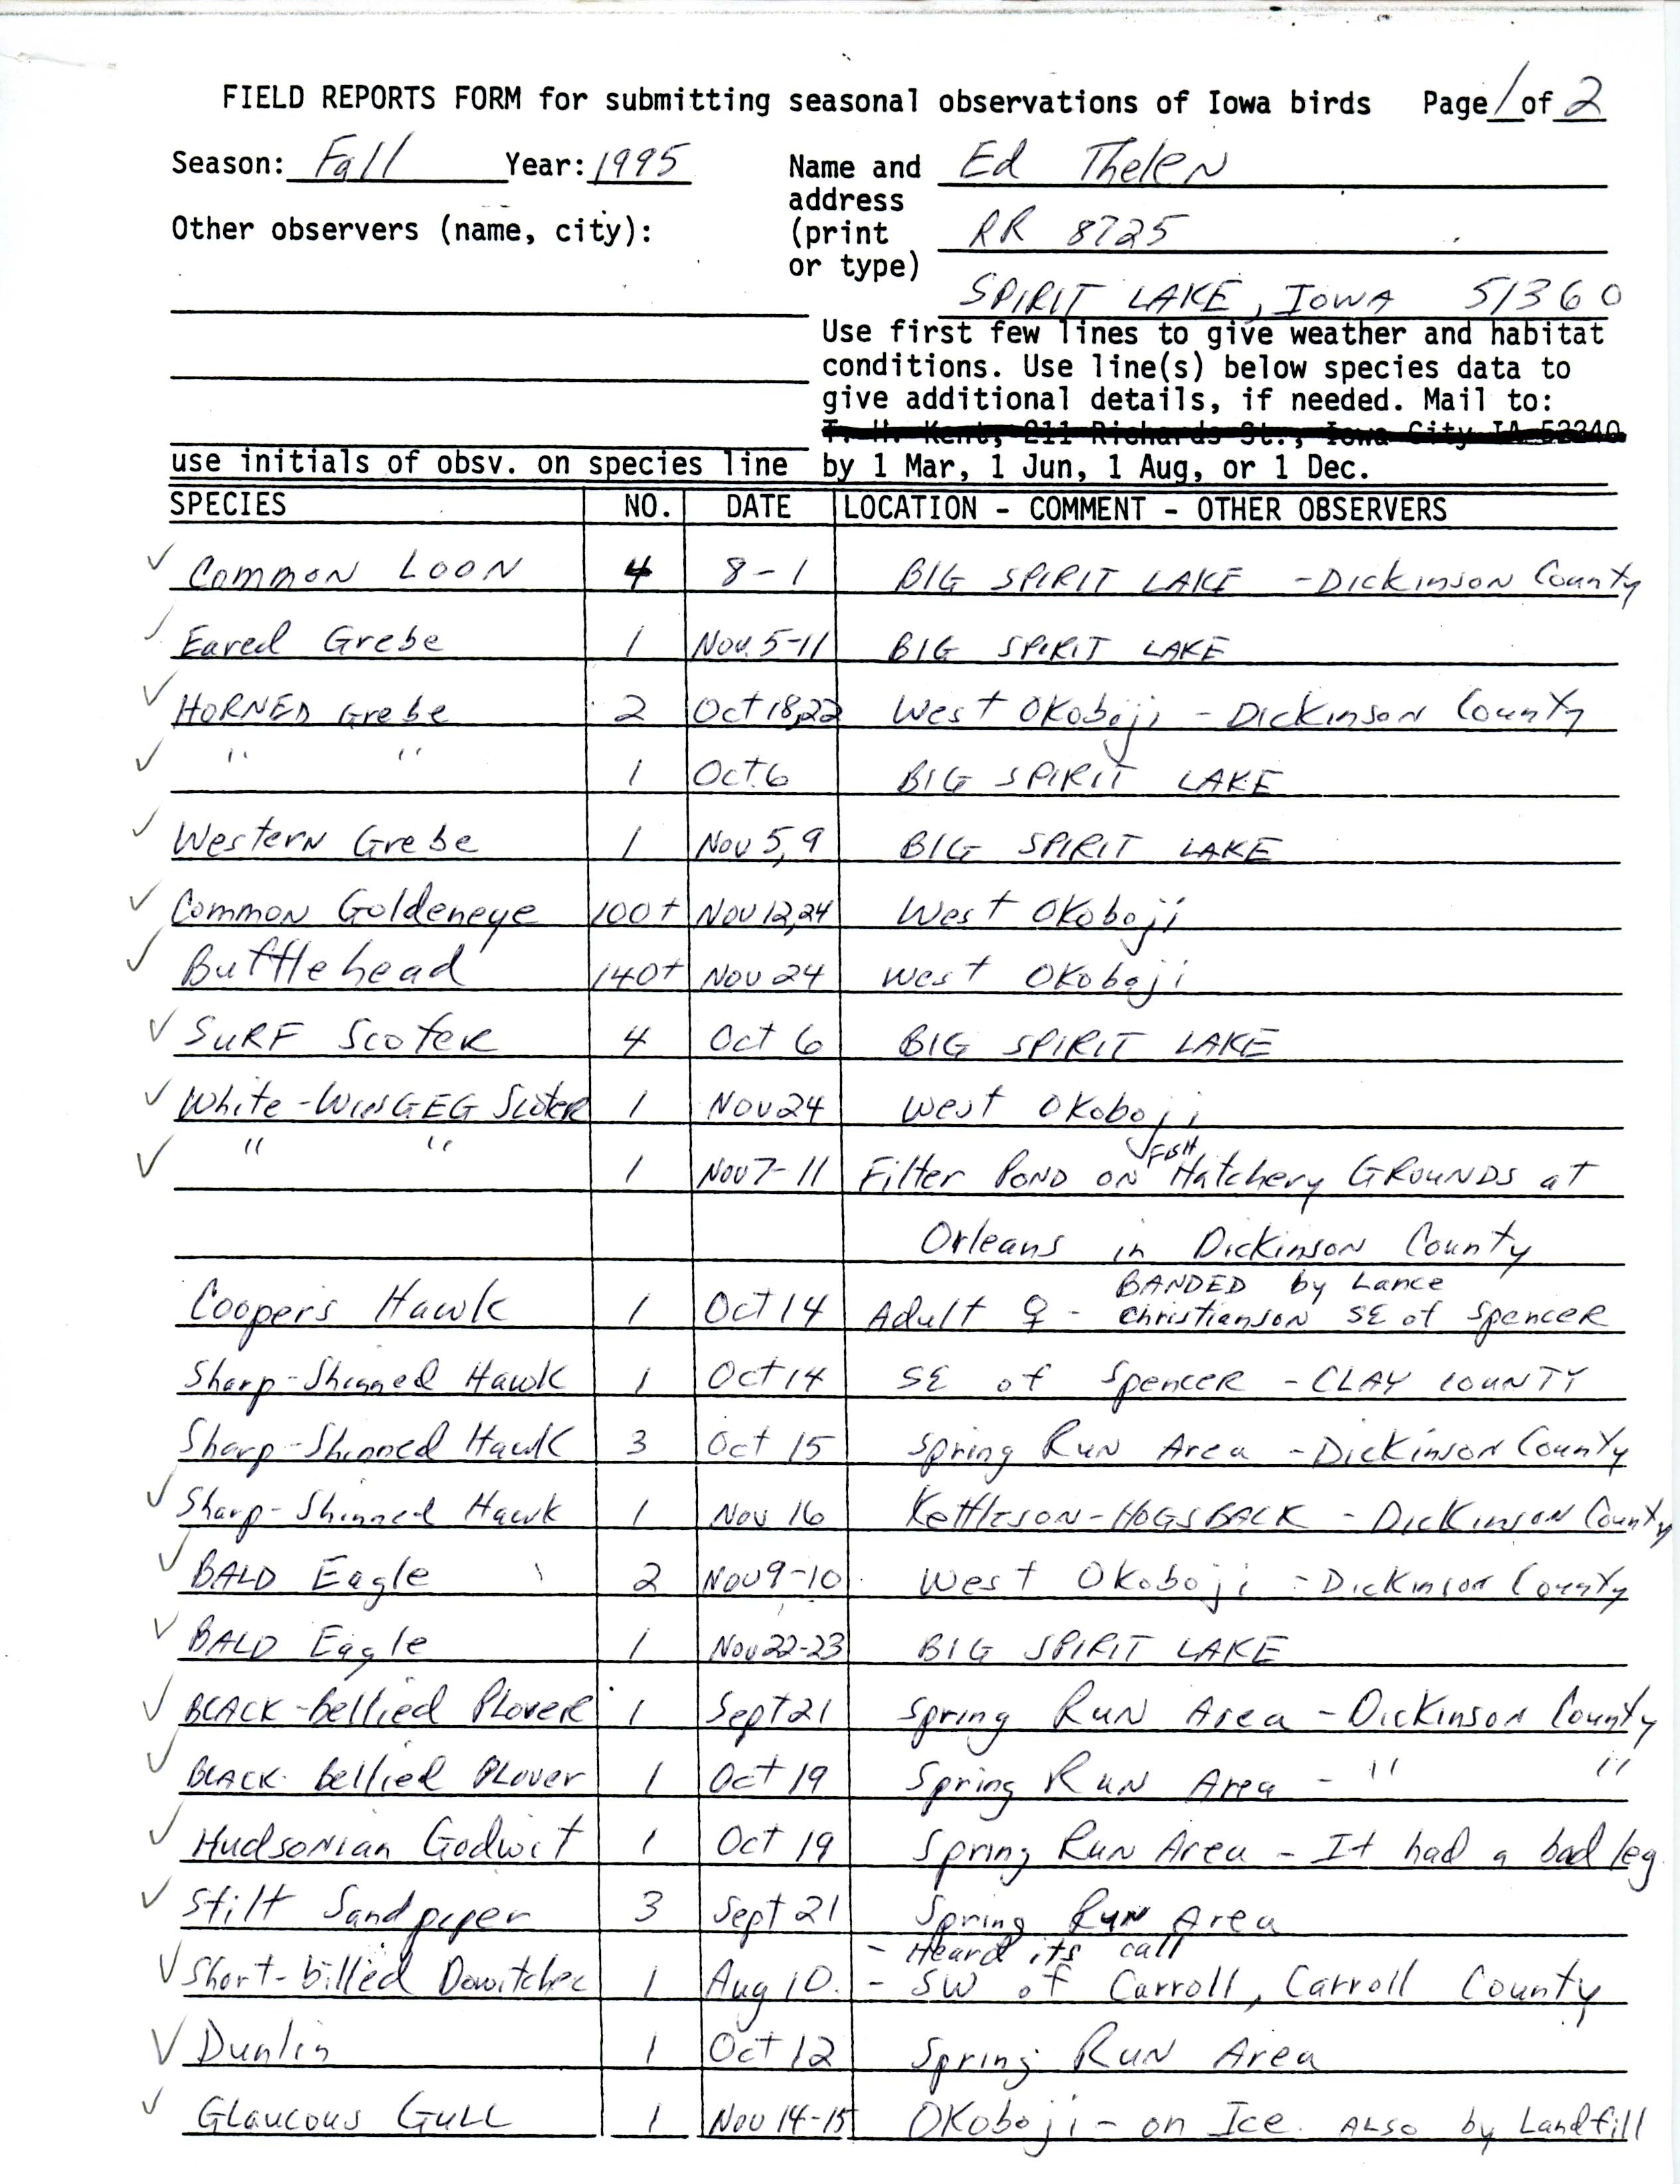 Field reports form for submitting seasonal observations of Iowa birds, Ed Thelen, fall 1995